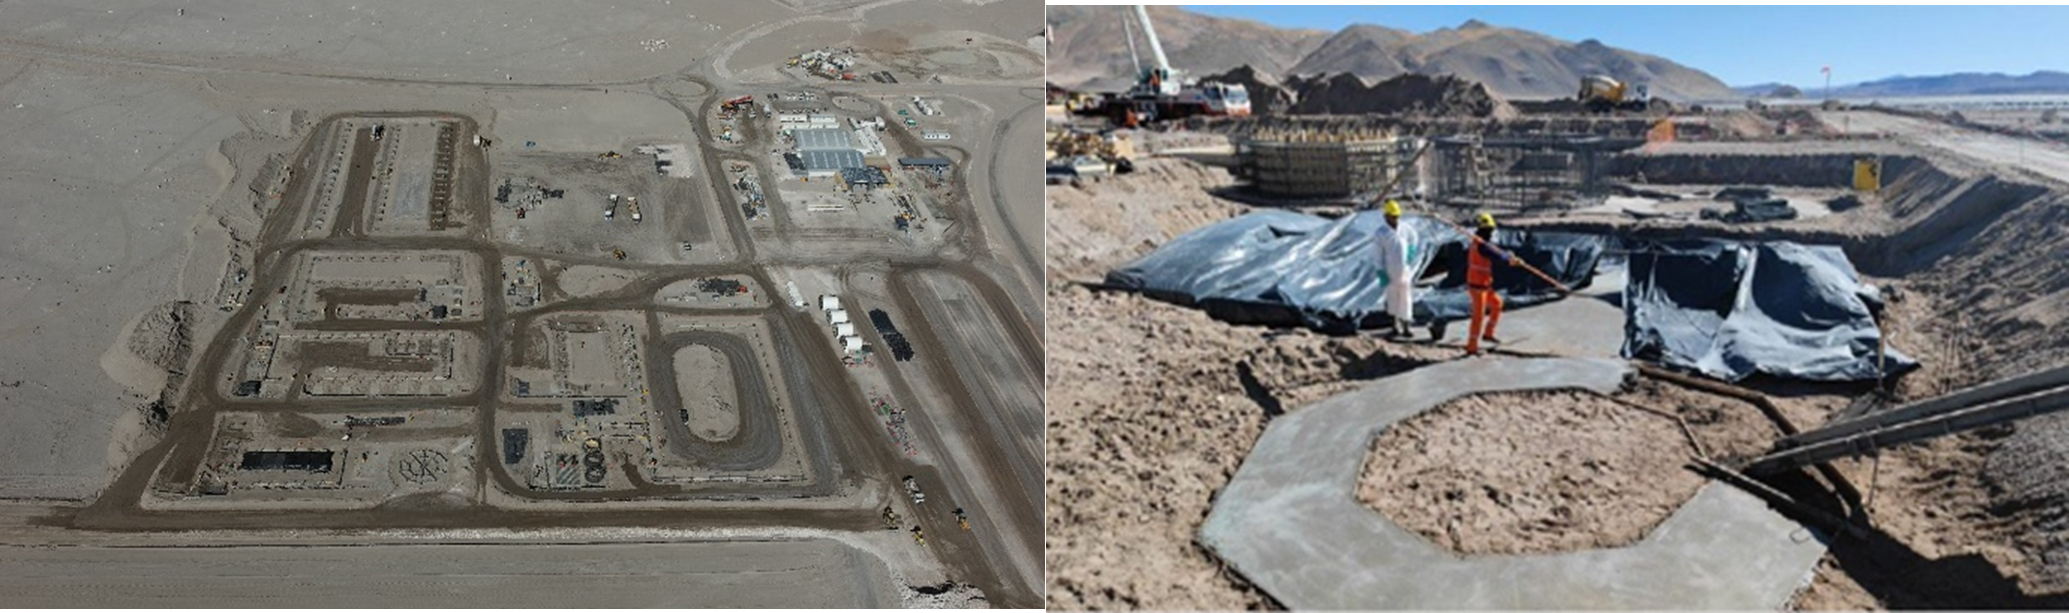 Process Plant overview (left) and concrete foundations (right)